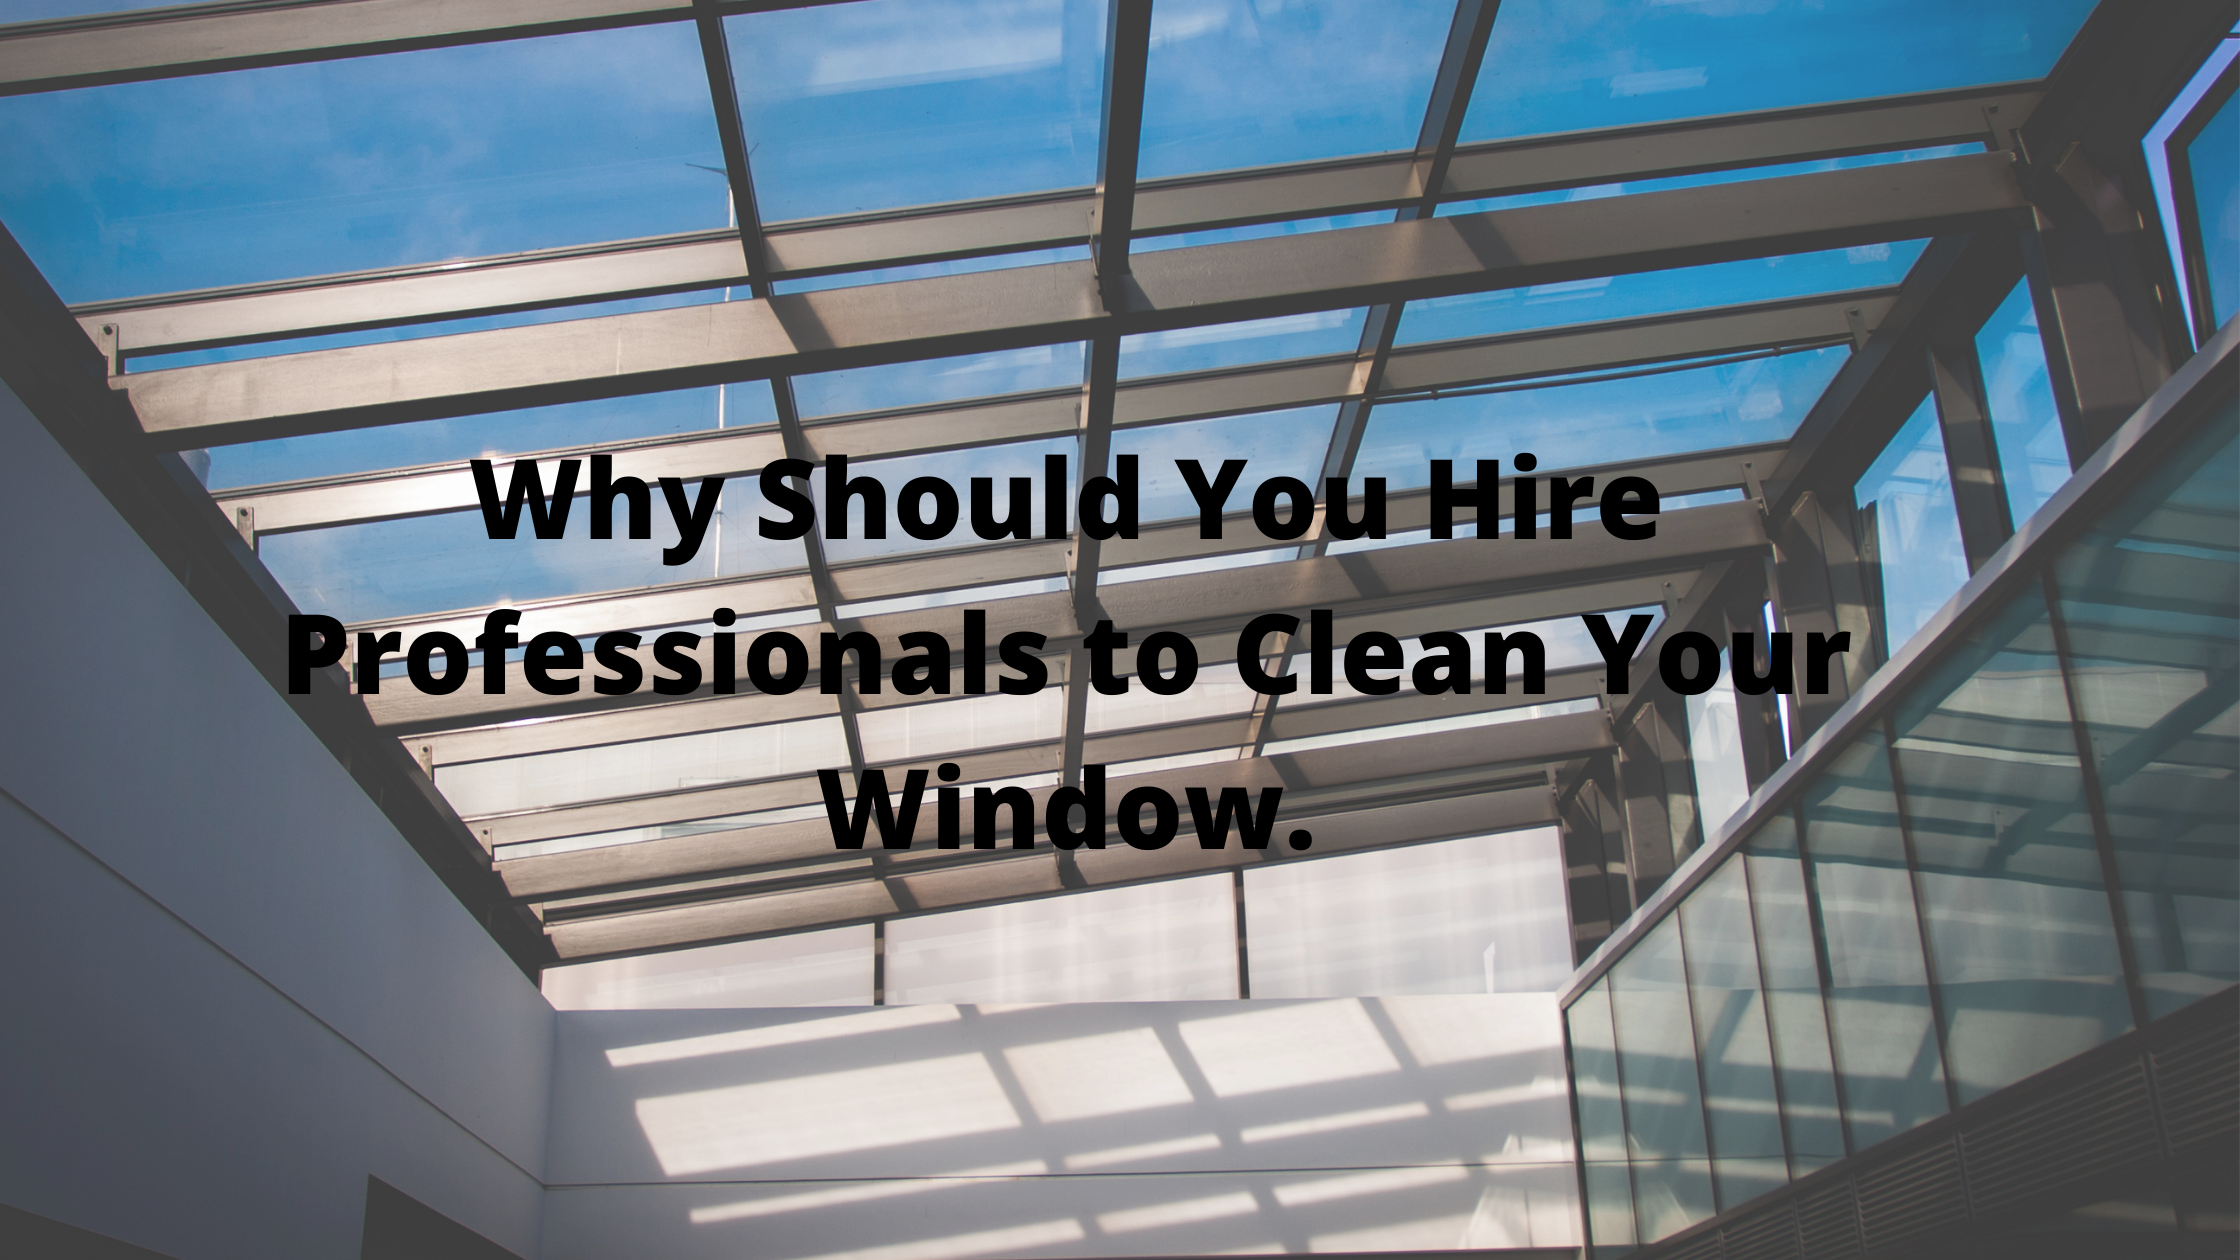 Why Should You Hire Professionals to Clean Your Windows?